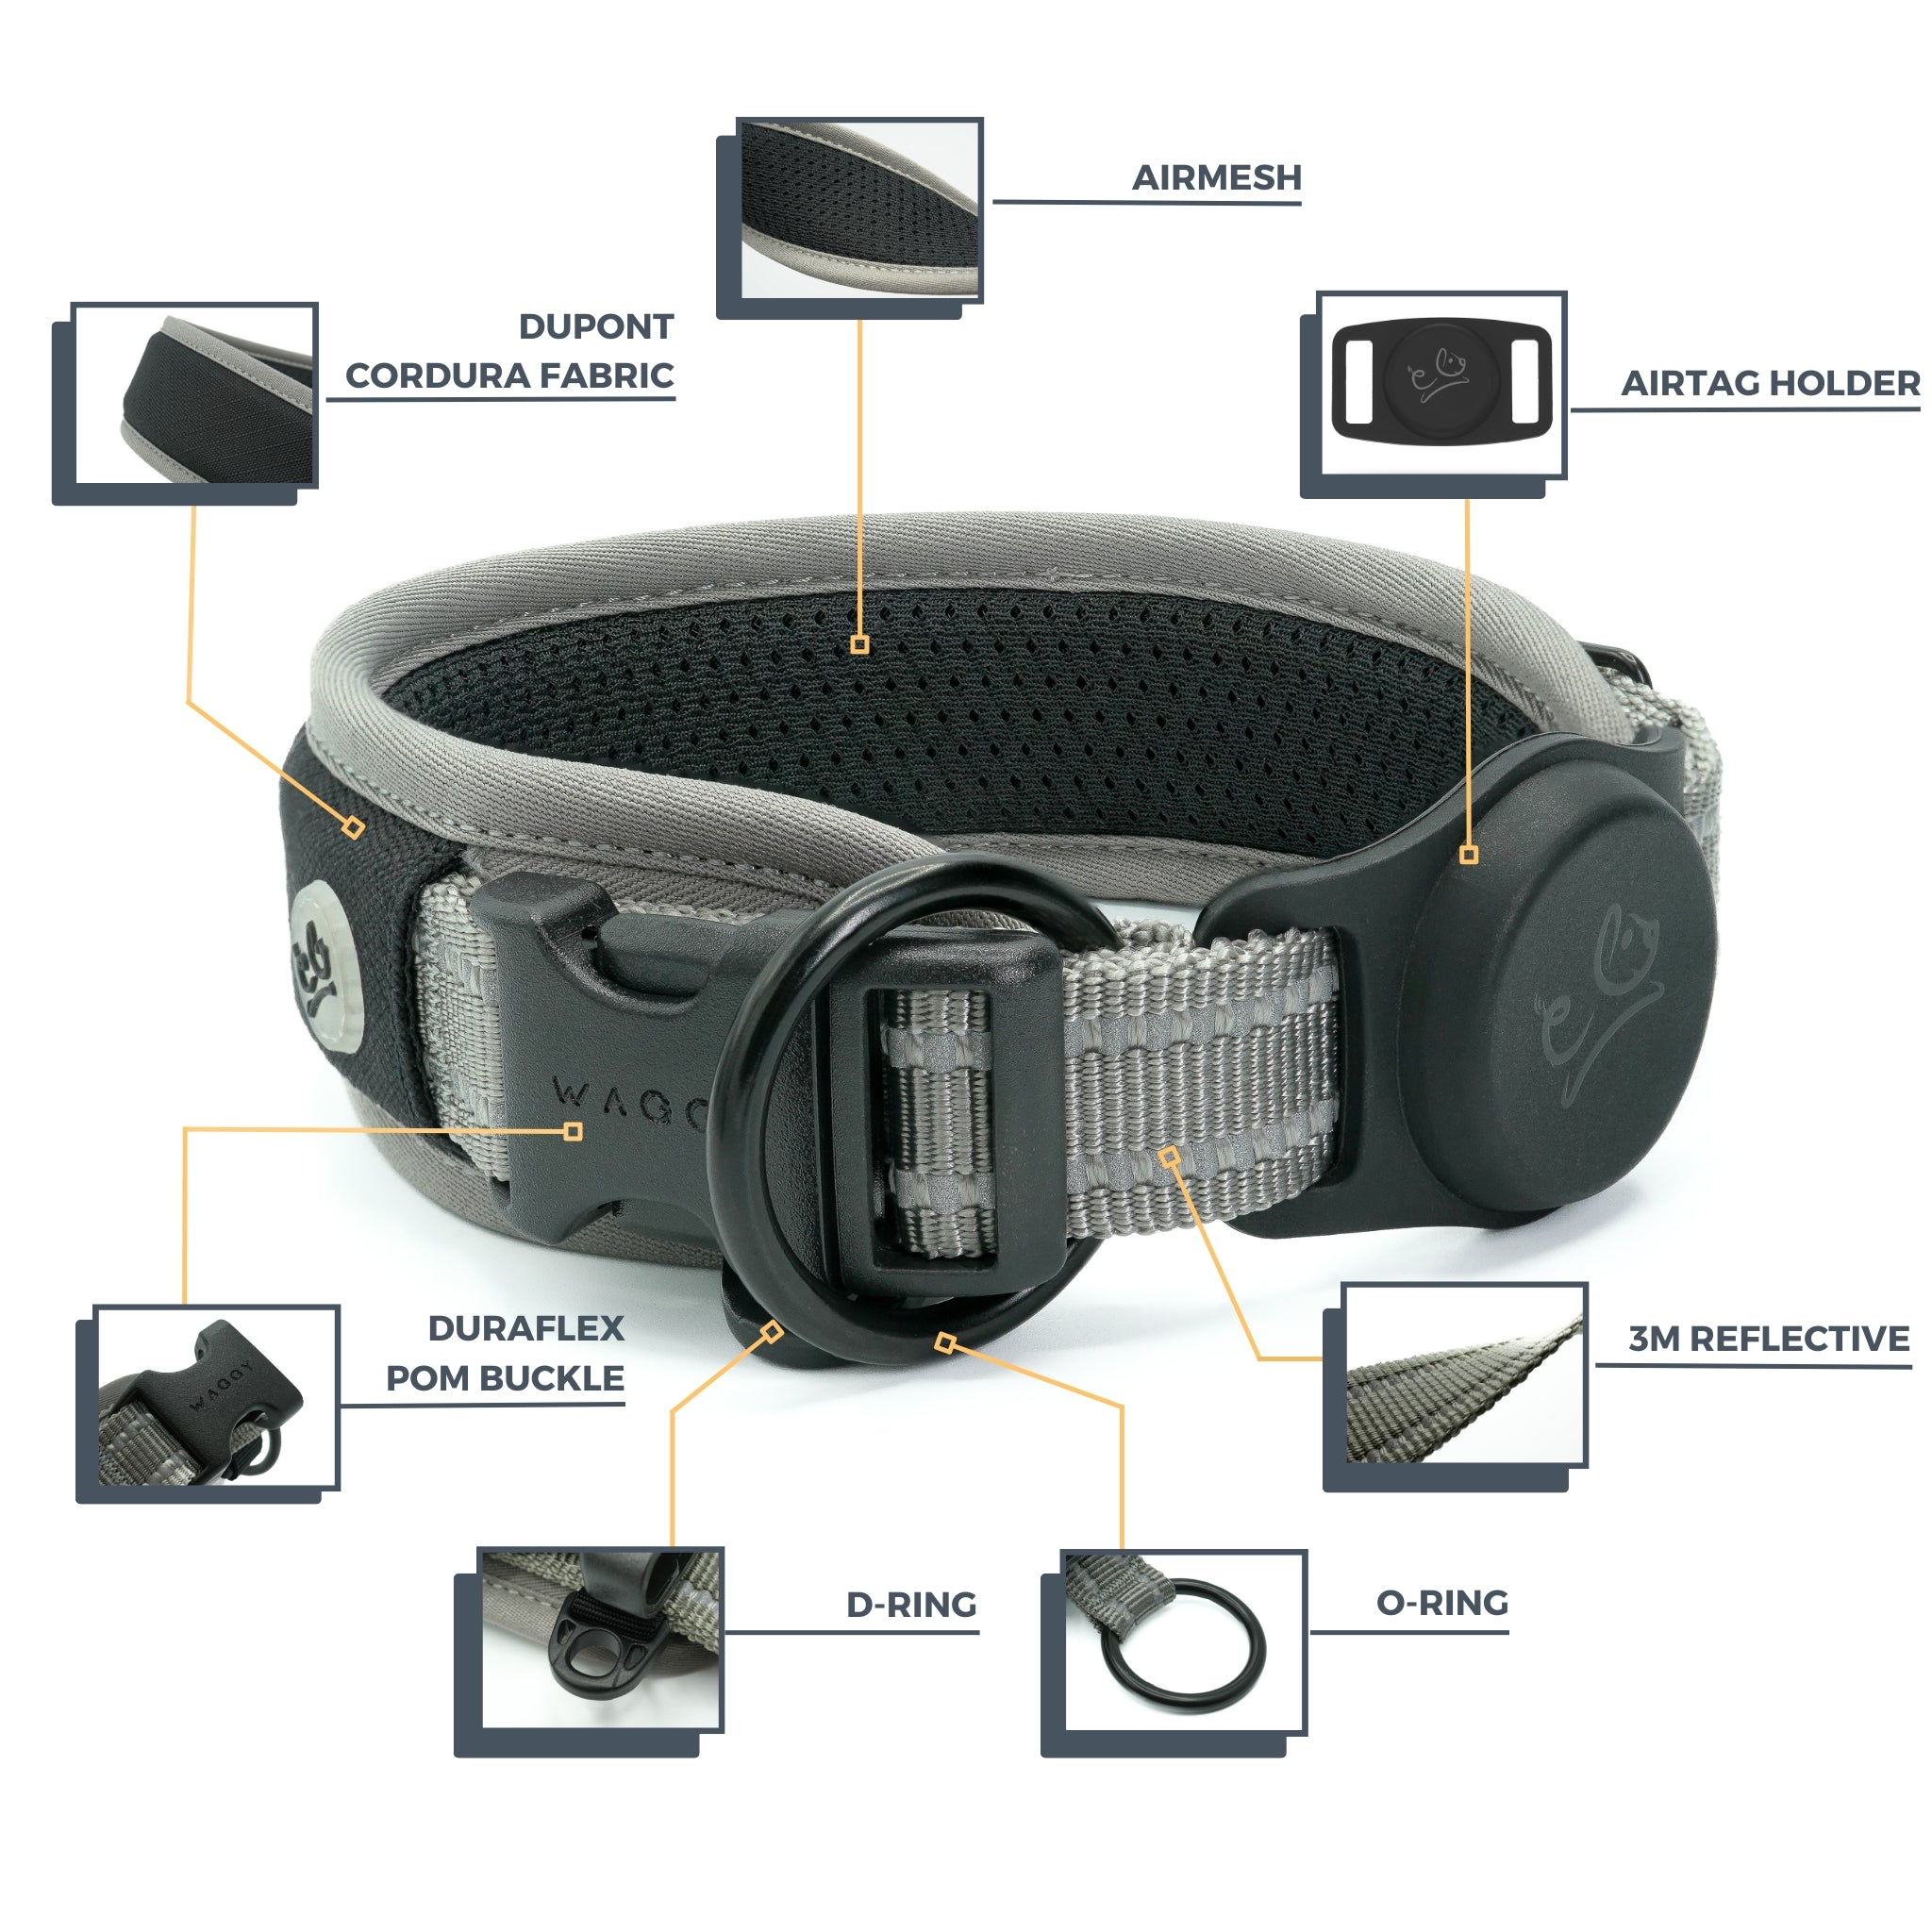 Grey Air Mesh collar showing all the details. 7 different features: Dupont Cordura Fabric; Air Mesh; Airtag Holder; Duraflex buckle; D-ring; O-ring; 3M reflective